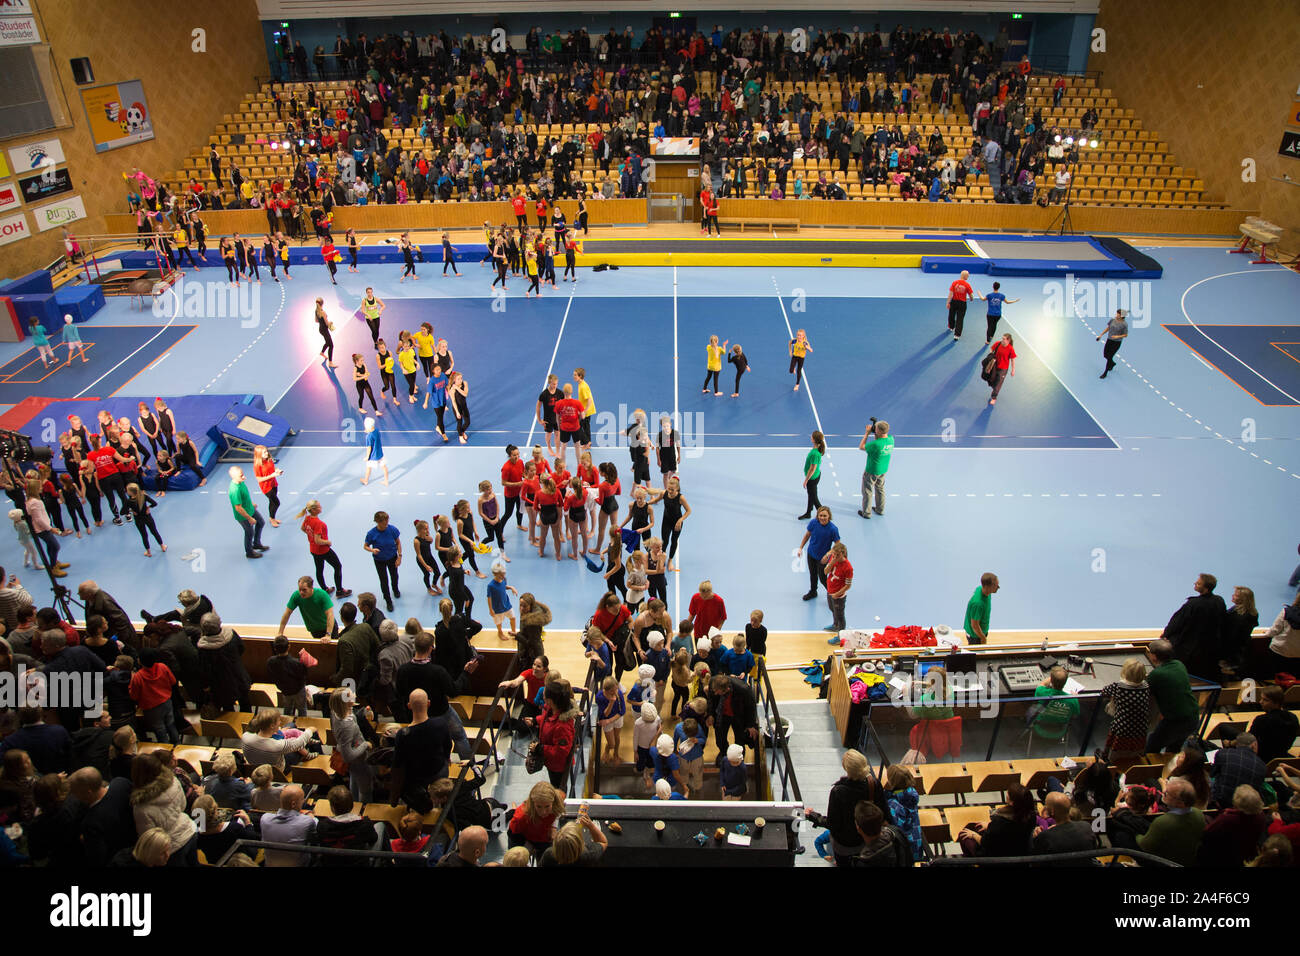 Gymnastics showing in a sports hall.Photo Jeppe Gustafsson Stock Photo